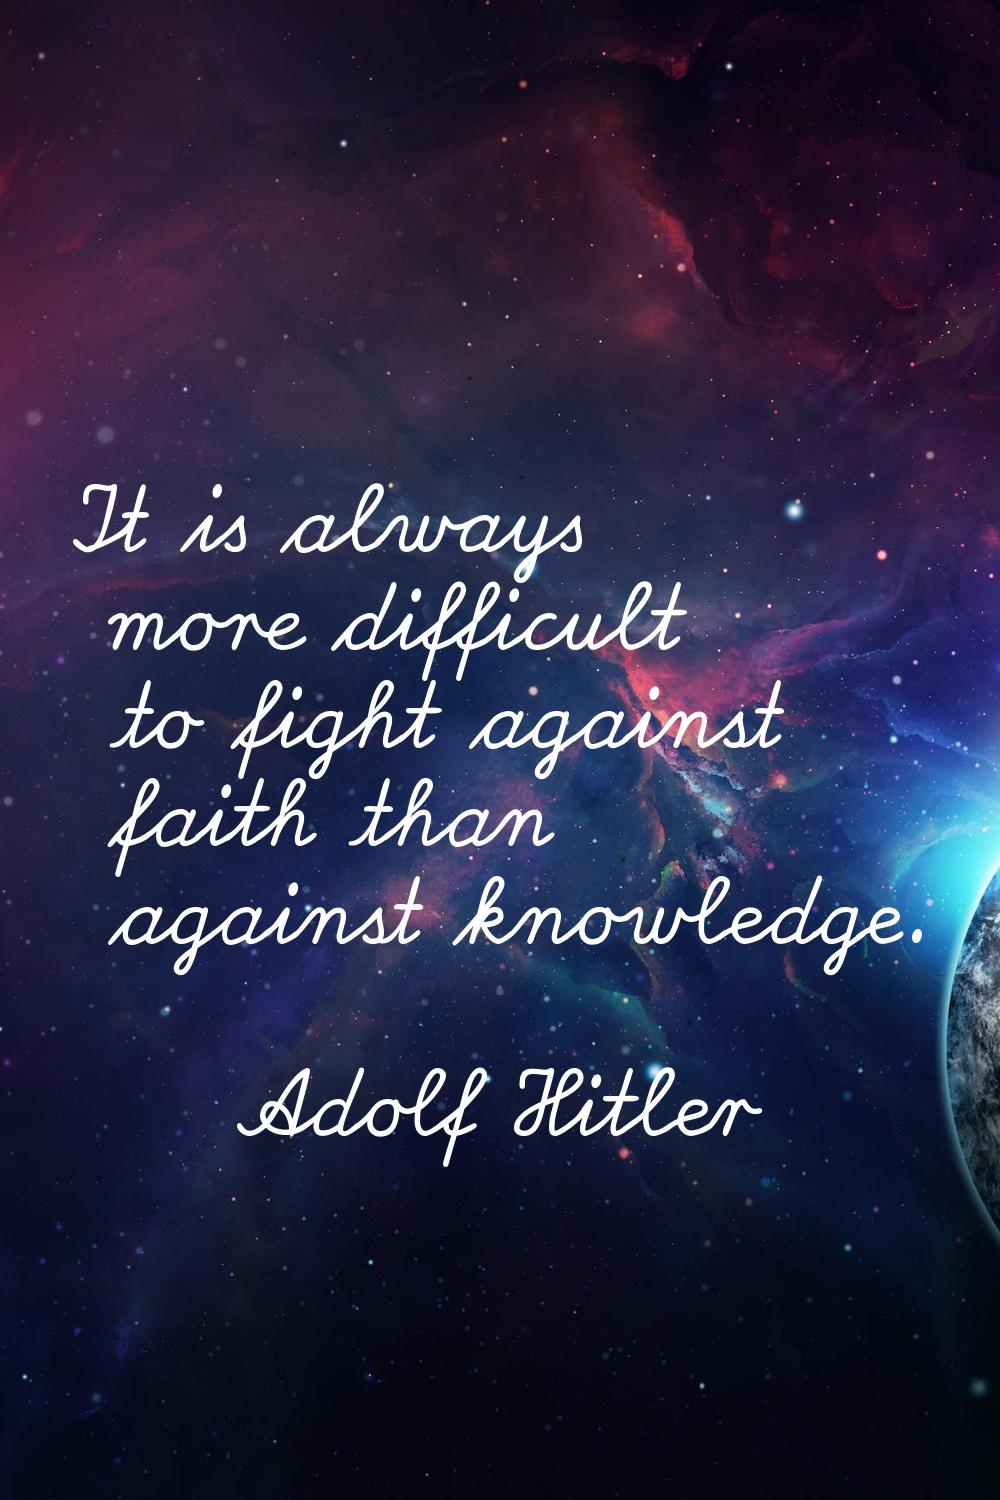 It is always more difficult to fight against faith than against knowledge.